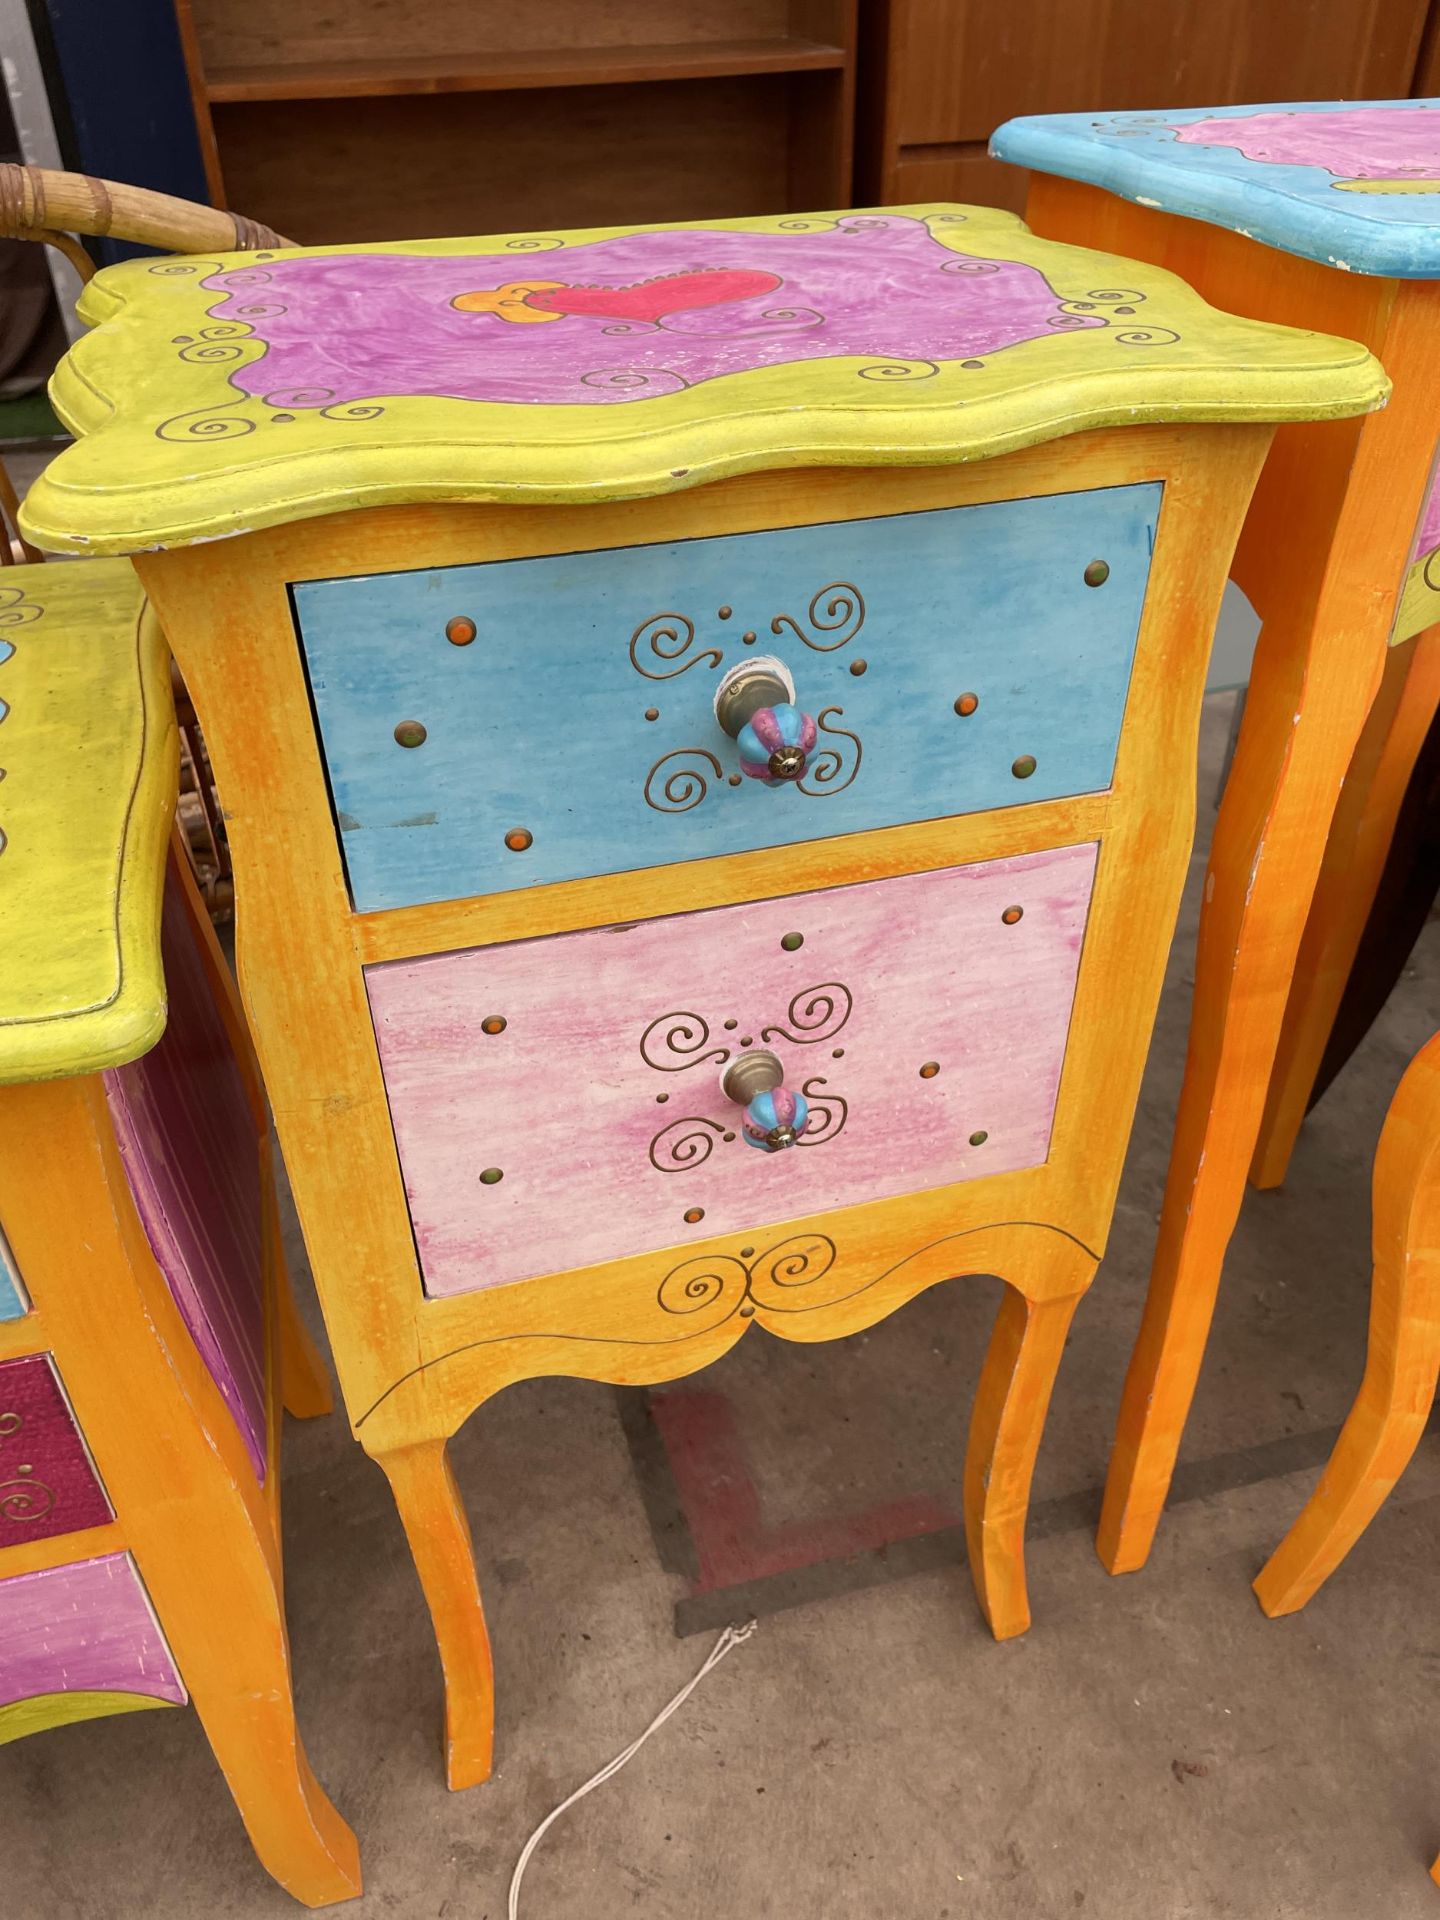 A RANGE OF BRIGHTLY PAINTED BEDTOOM FURNITURE, 3 CHESTS, MIRROR, CUPBOARDS AND SMALL TABLE - Image 6 of 6